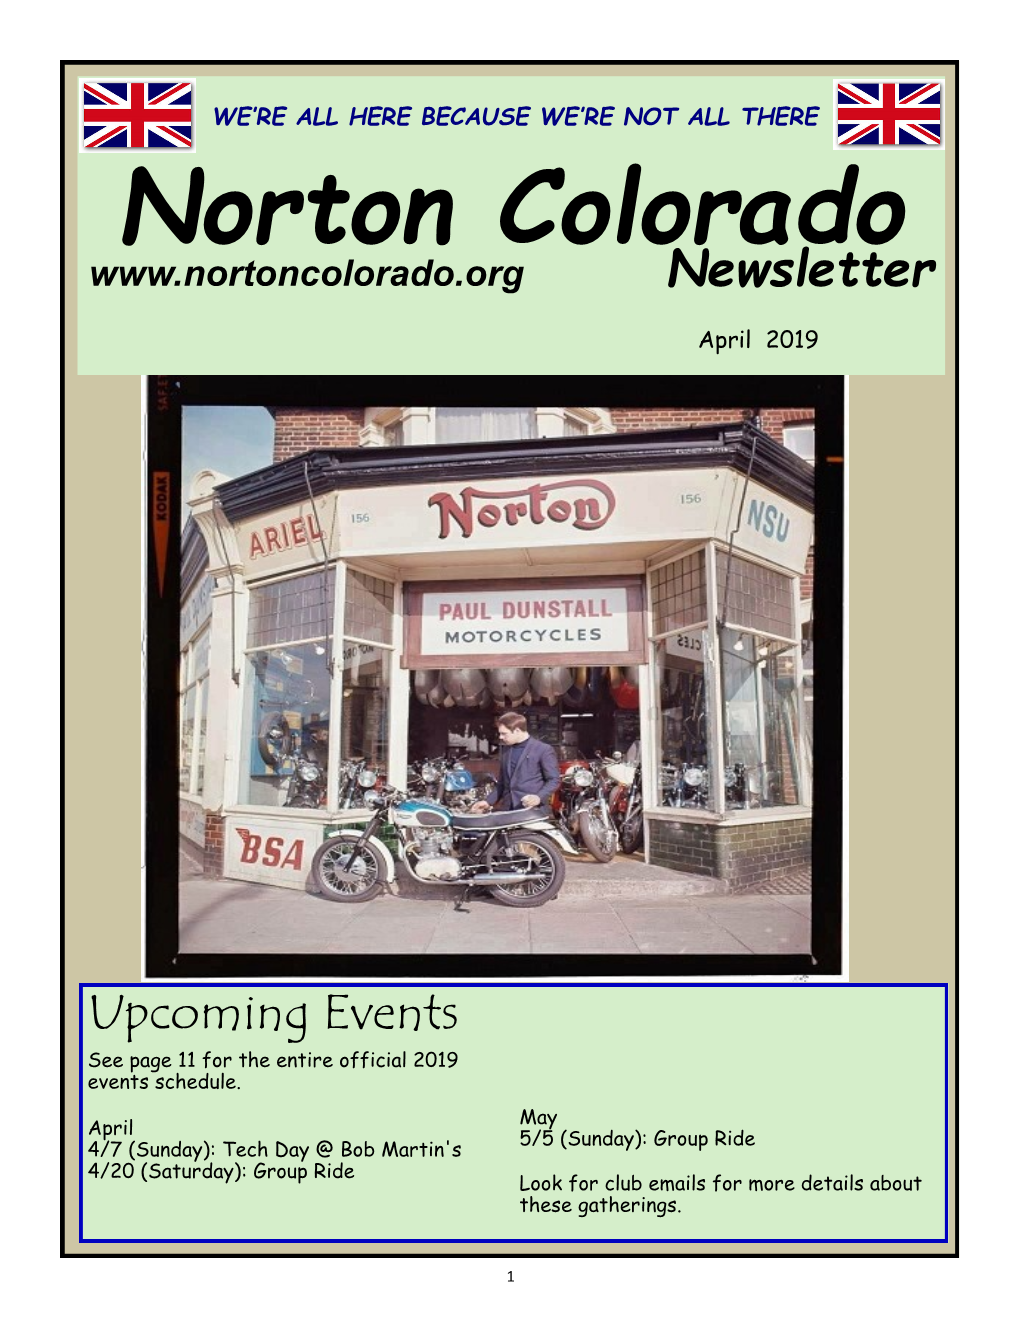 Norton Colorado 2019 Event Schedule Please Check This out and Feel Free to Contact Eric Bergman to Suggest More Ideas Or to Volunteer to Host an Event